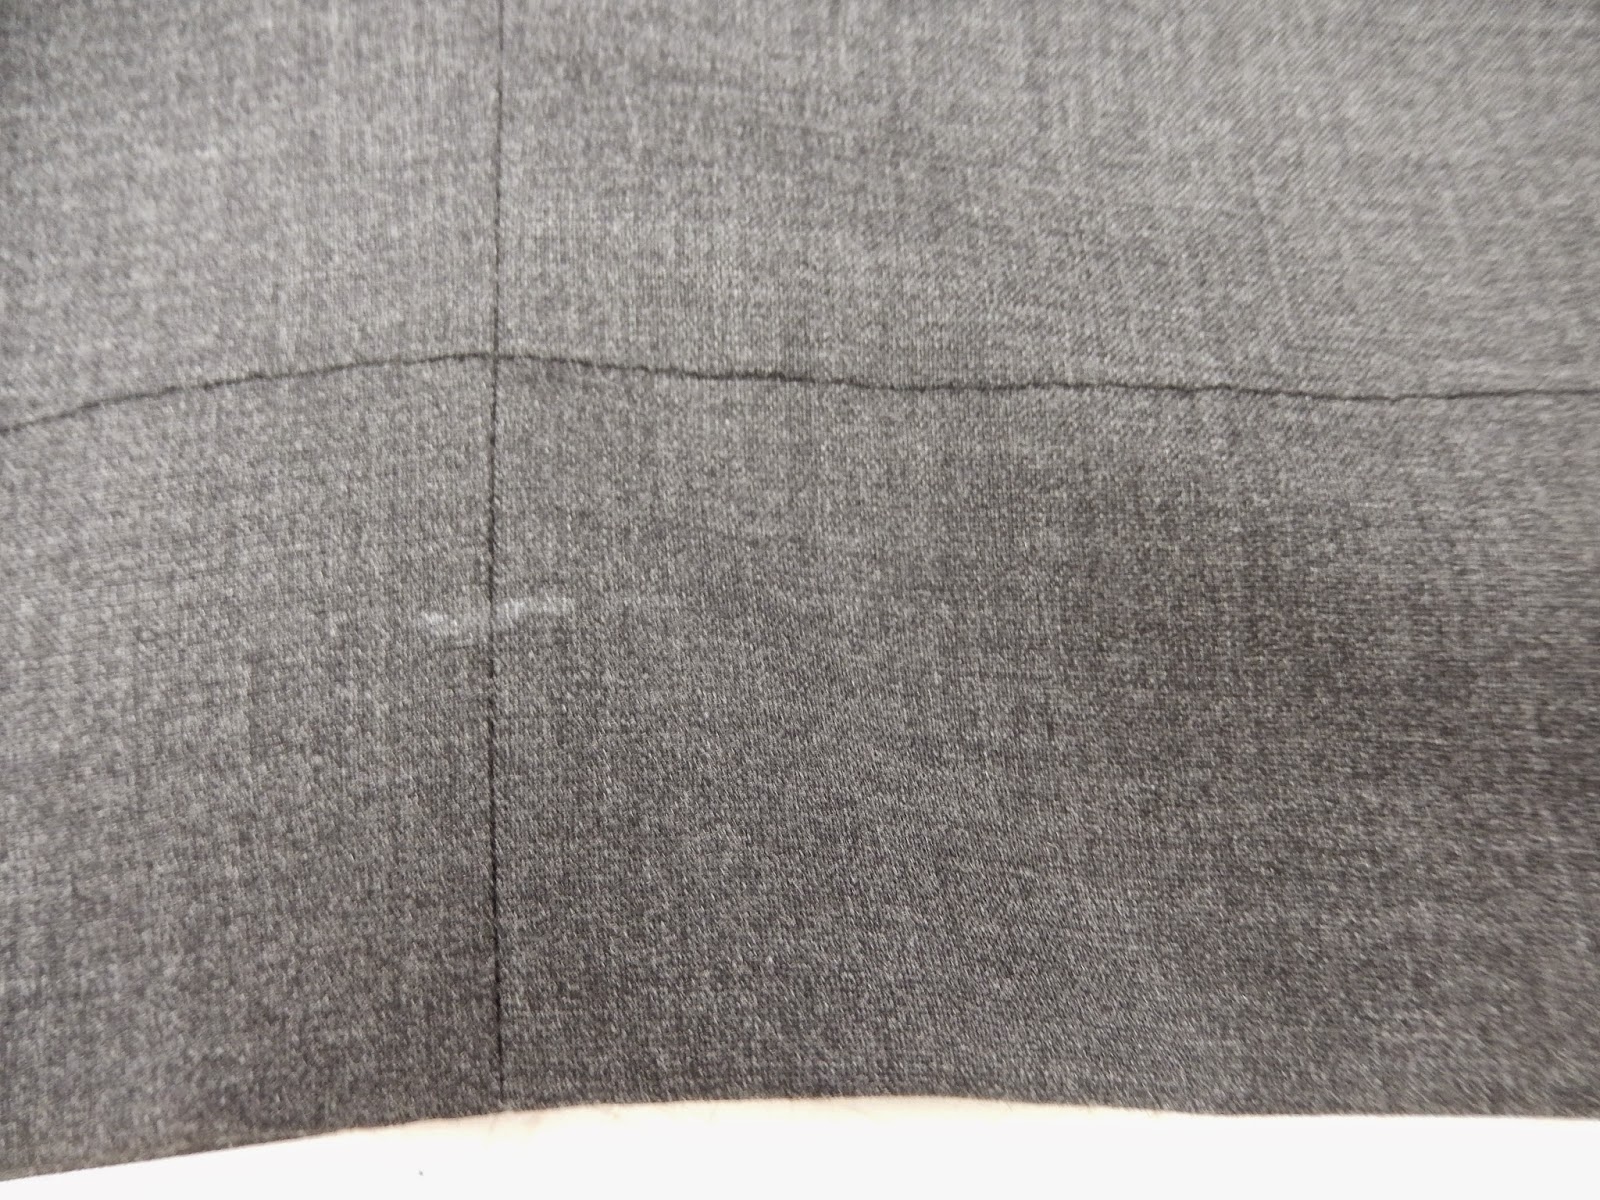 Seam 2 Seam: How to Shorten Trousers with Cuff